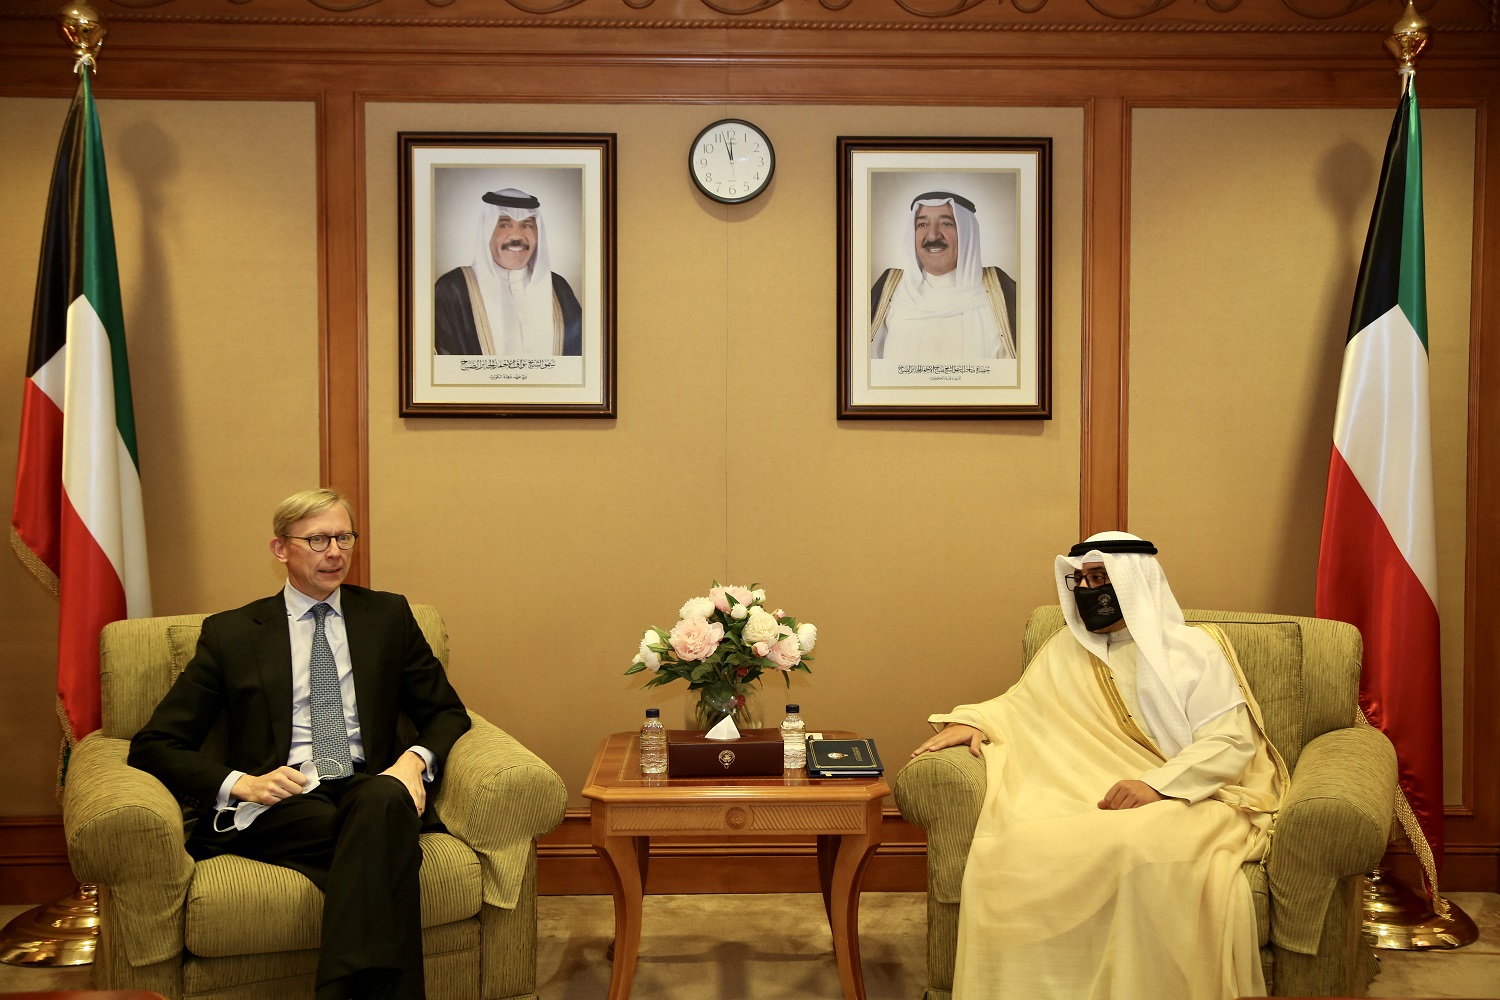 Foreign Minister Sheikh Dr. Ahmad Nasser Al-Mohammad receives US Special Representative for Iran and Senior Policy Advisor to Secretary of State, Brian Hook